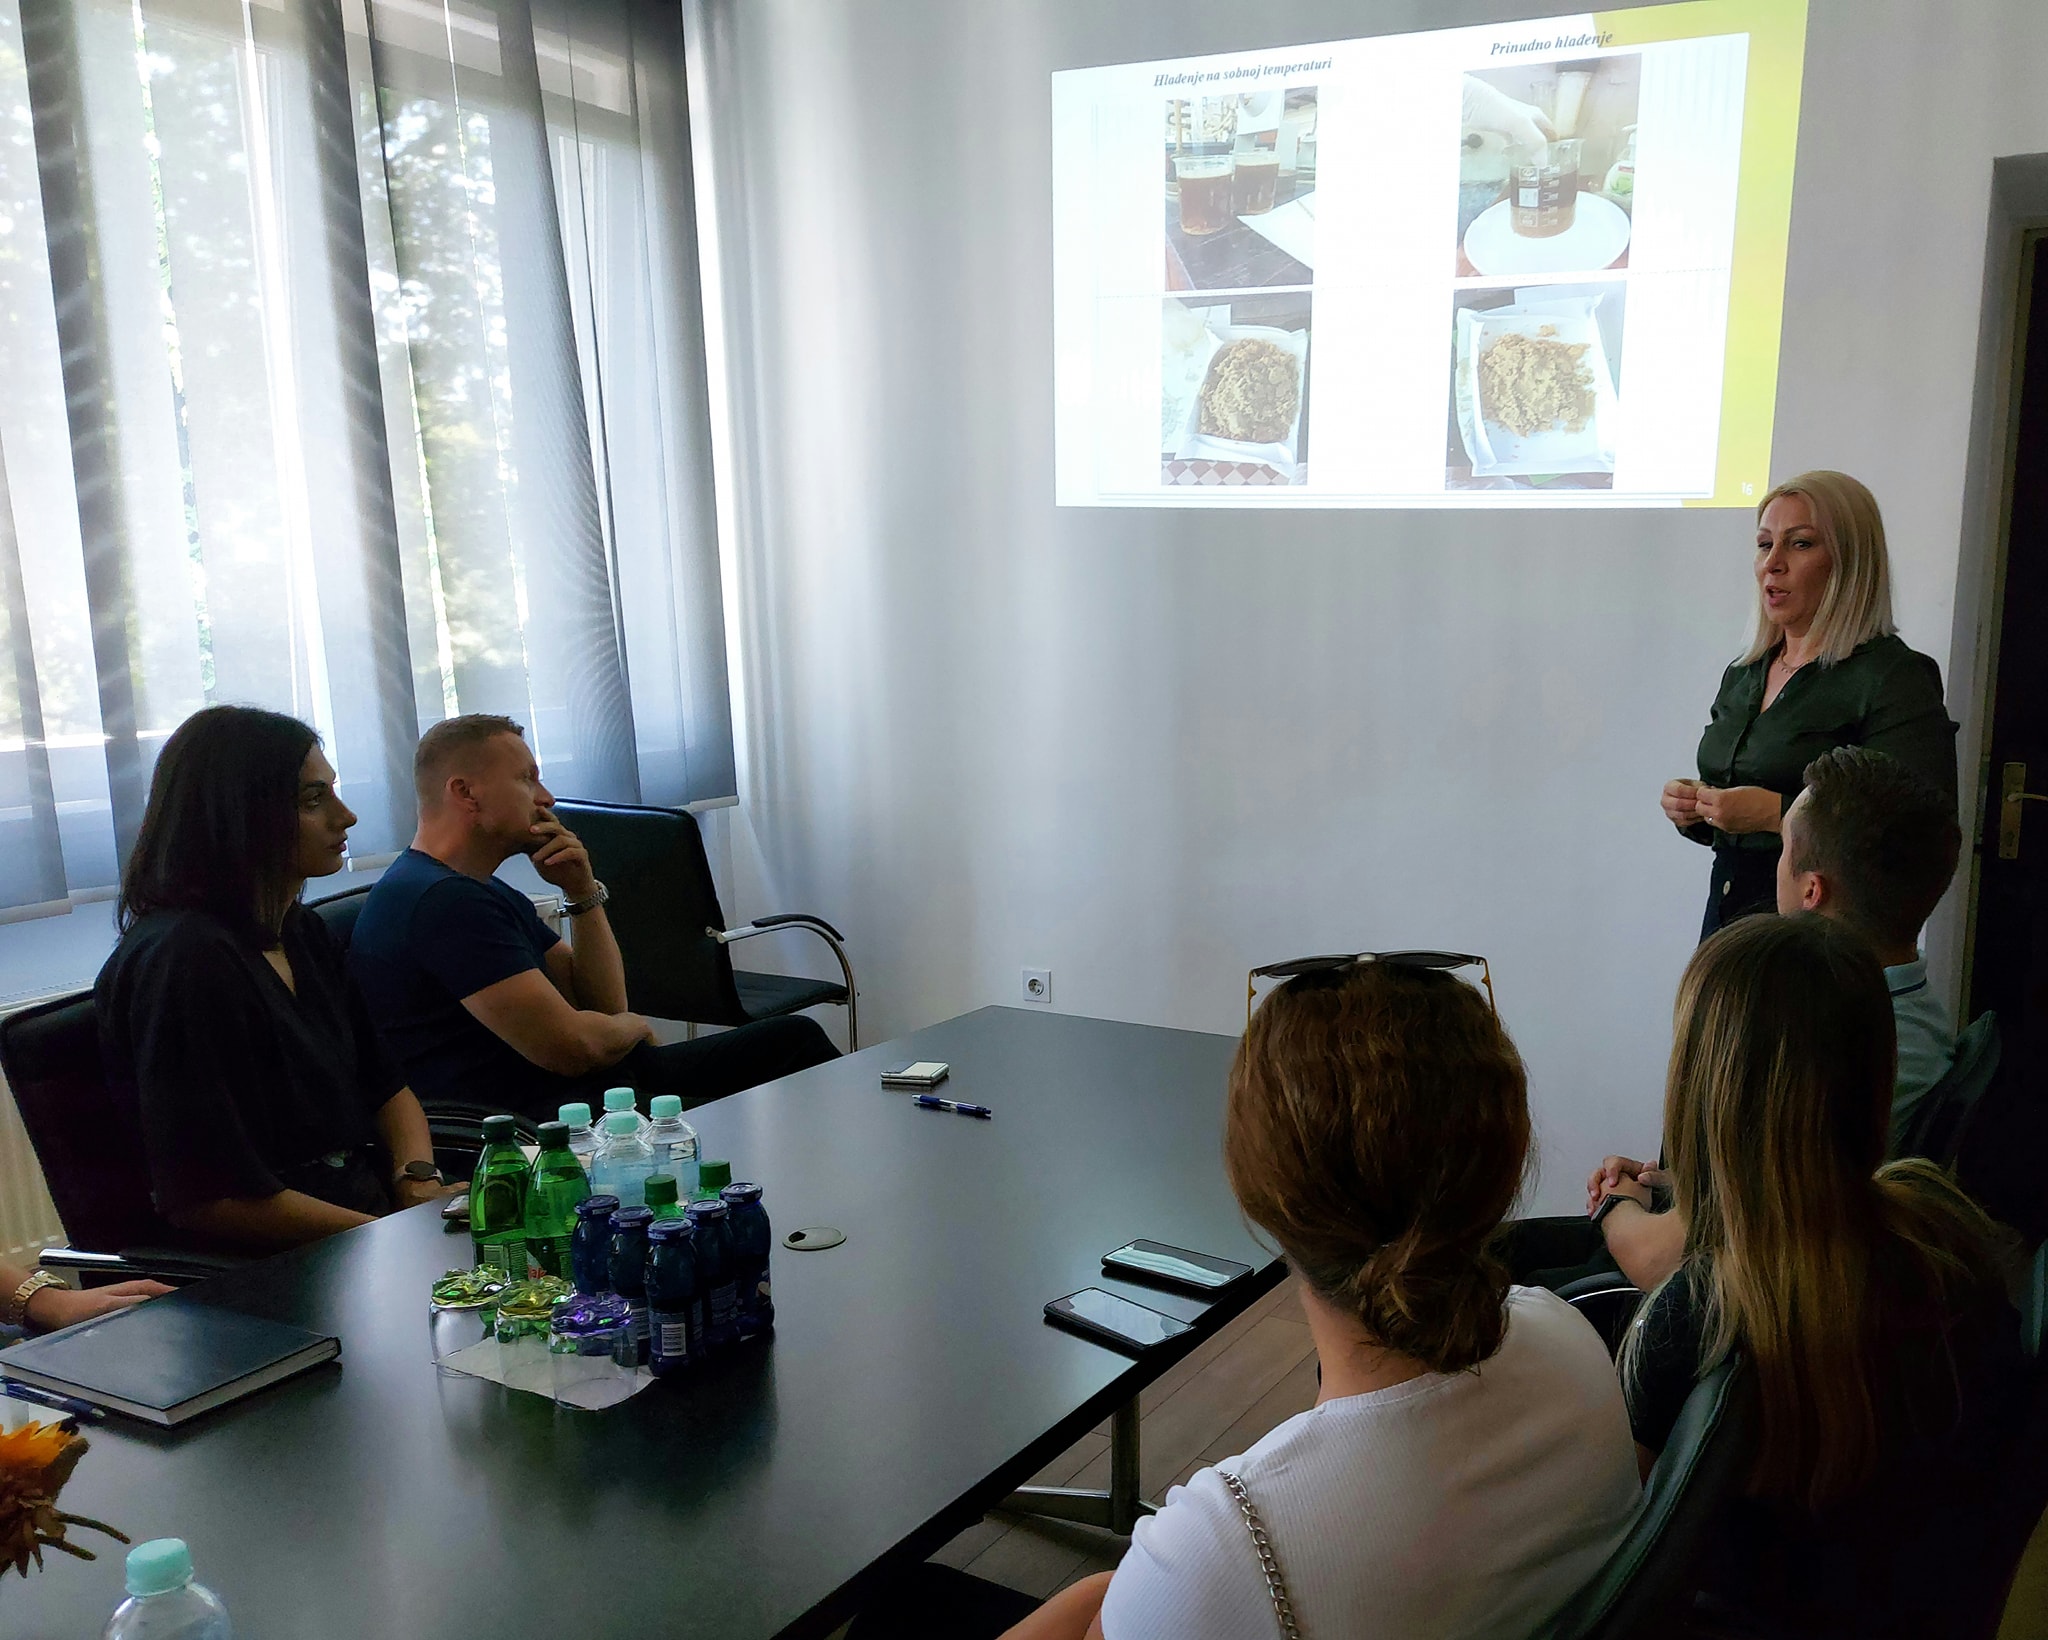 The Scientific Research Project of Edisa Papraćanin was presented